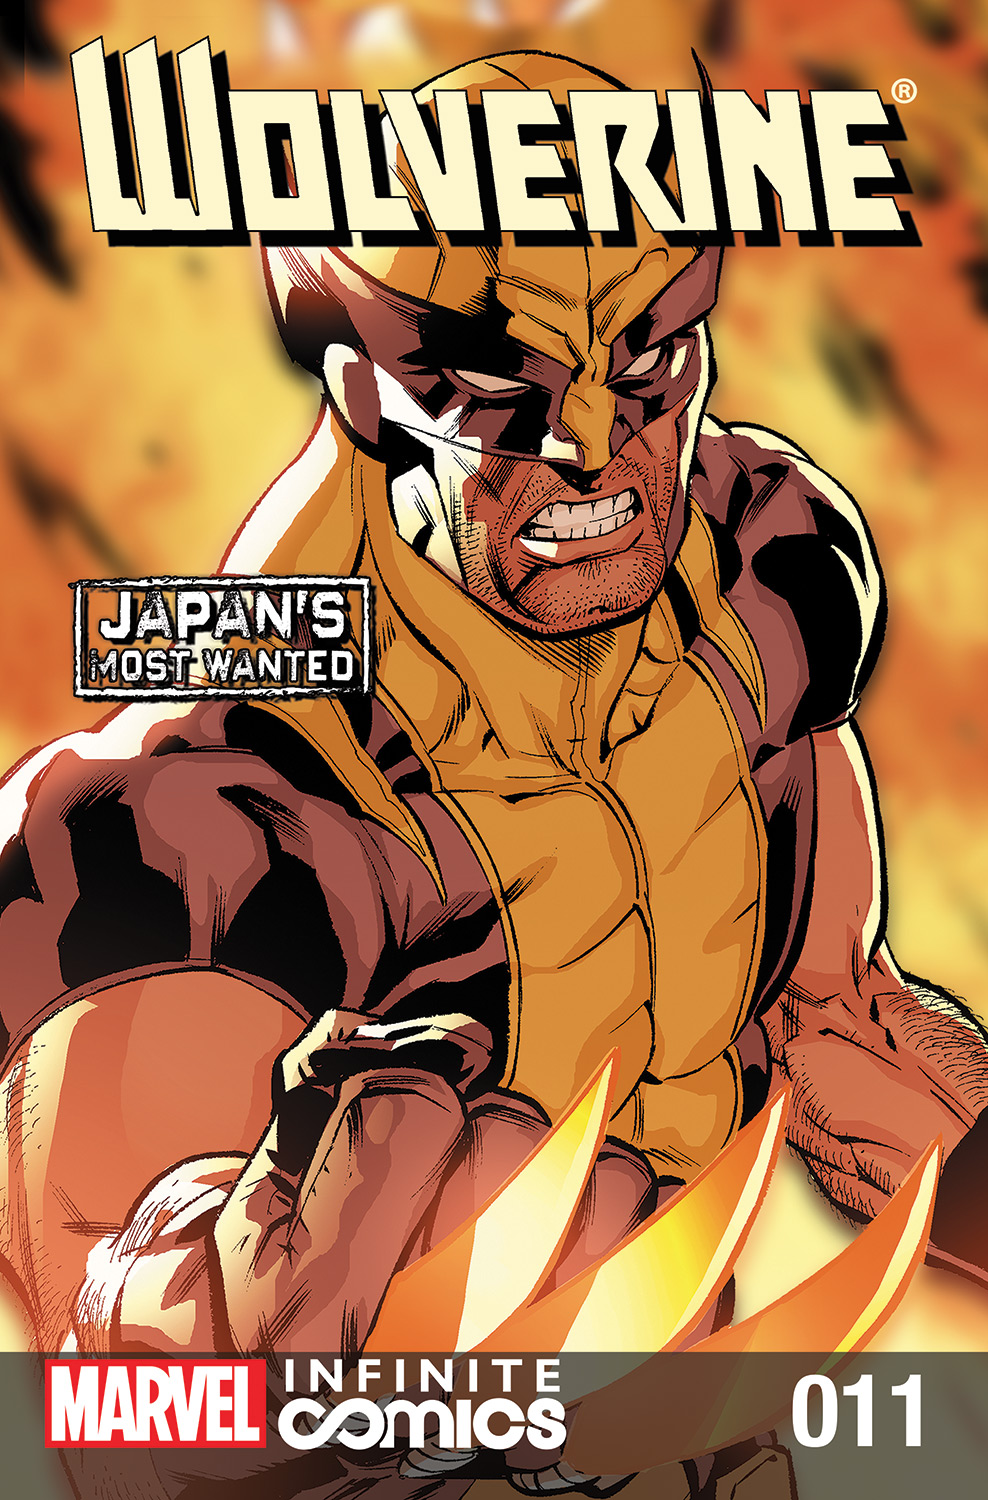 Wolverine: Japan's Most Wanted Infinite Comic (2013) #11